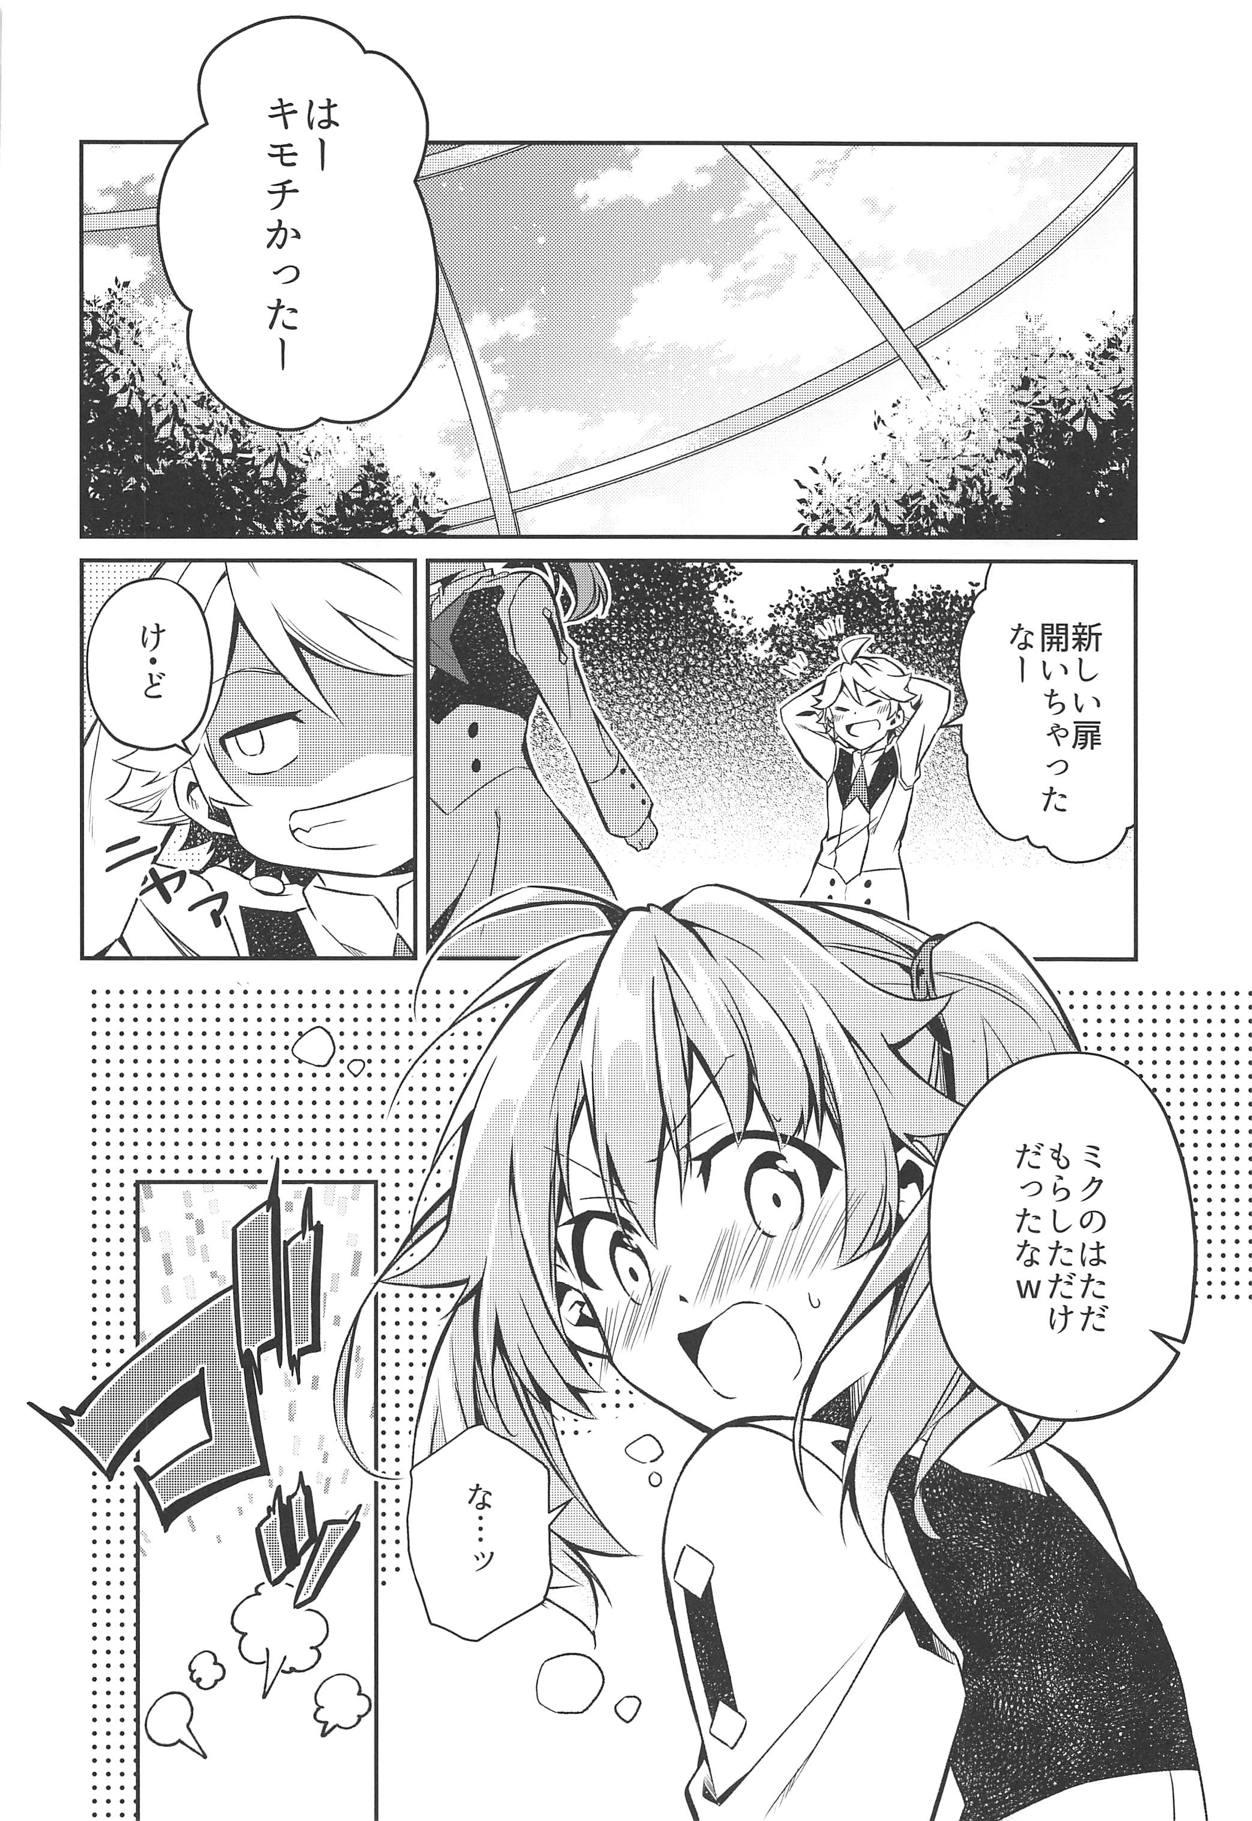 Cavalgando KISS OF EROS - Darling in the franxx Squirting - Page 11